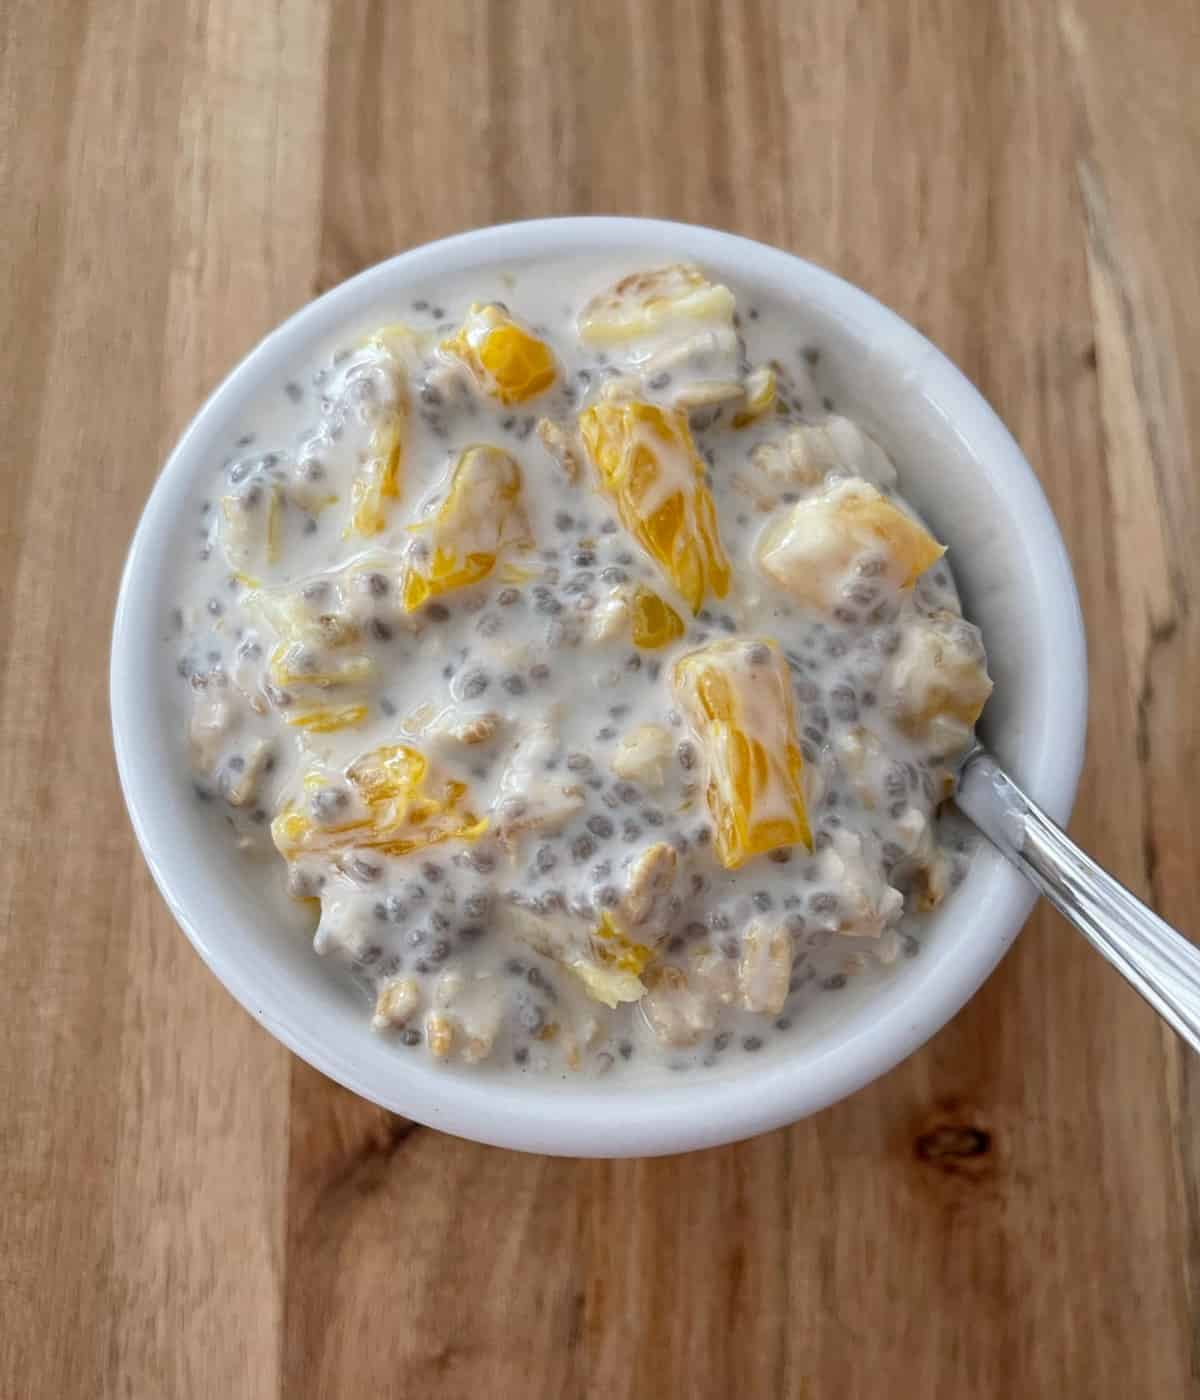 Overnight orange oats with chia seeds in small white bowl with spoon on wood surface.